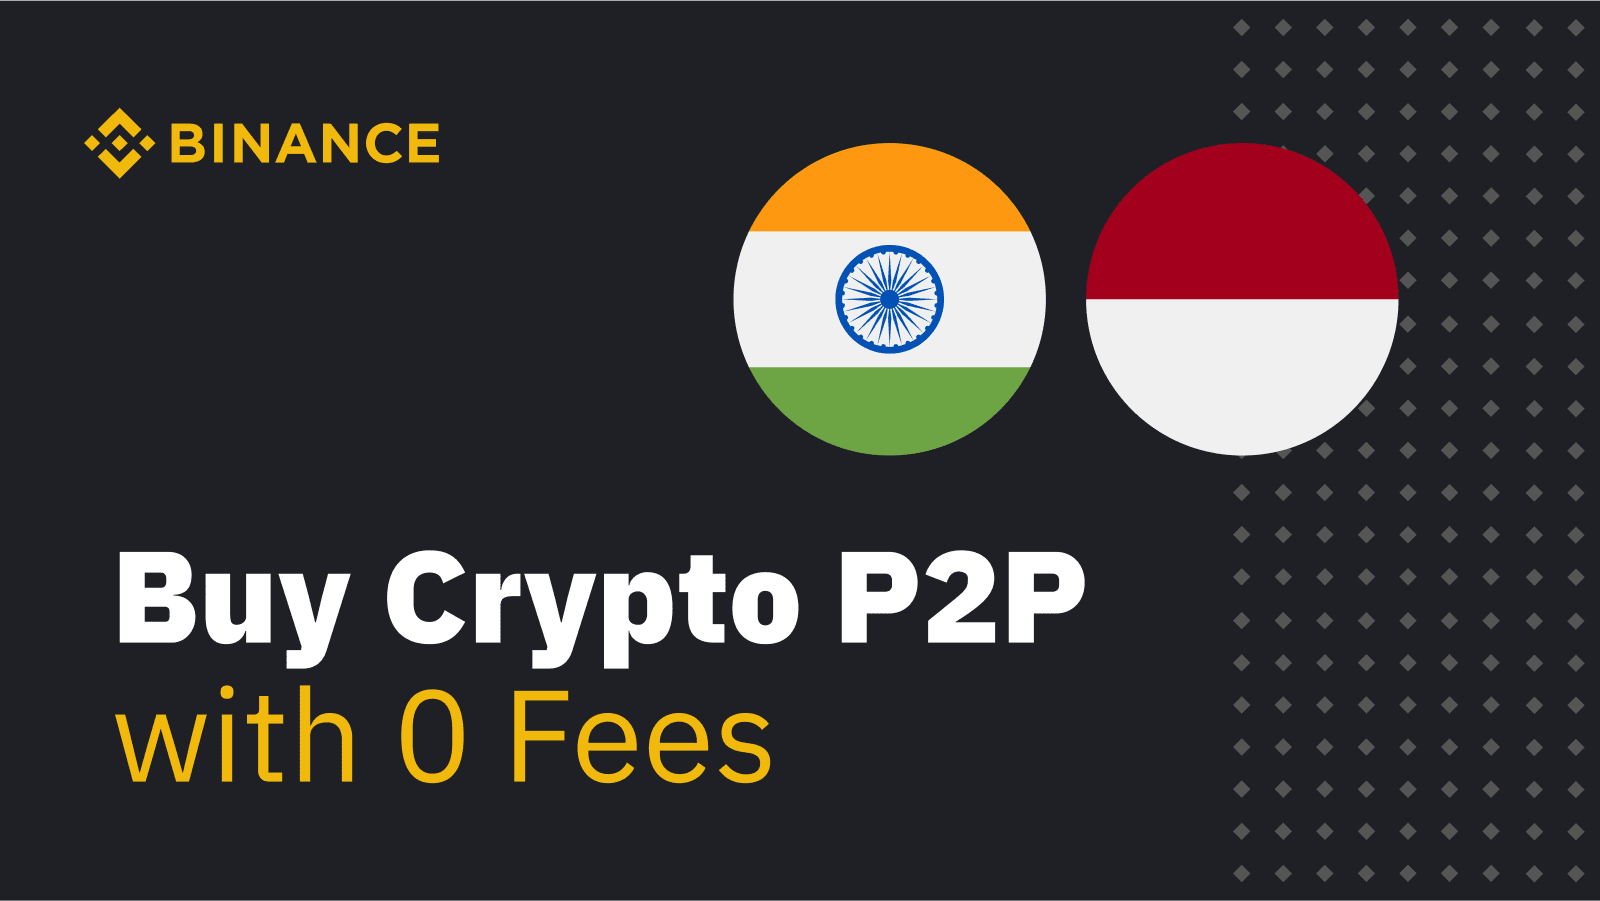 Binance P2P is Ban in India, Now what next? | Coindhan P2P